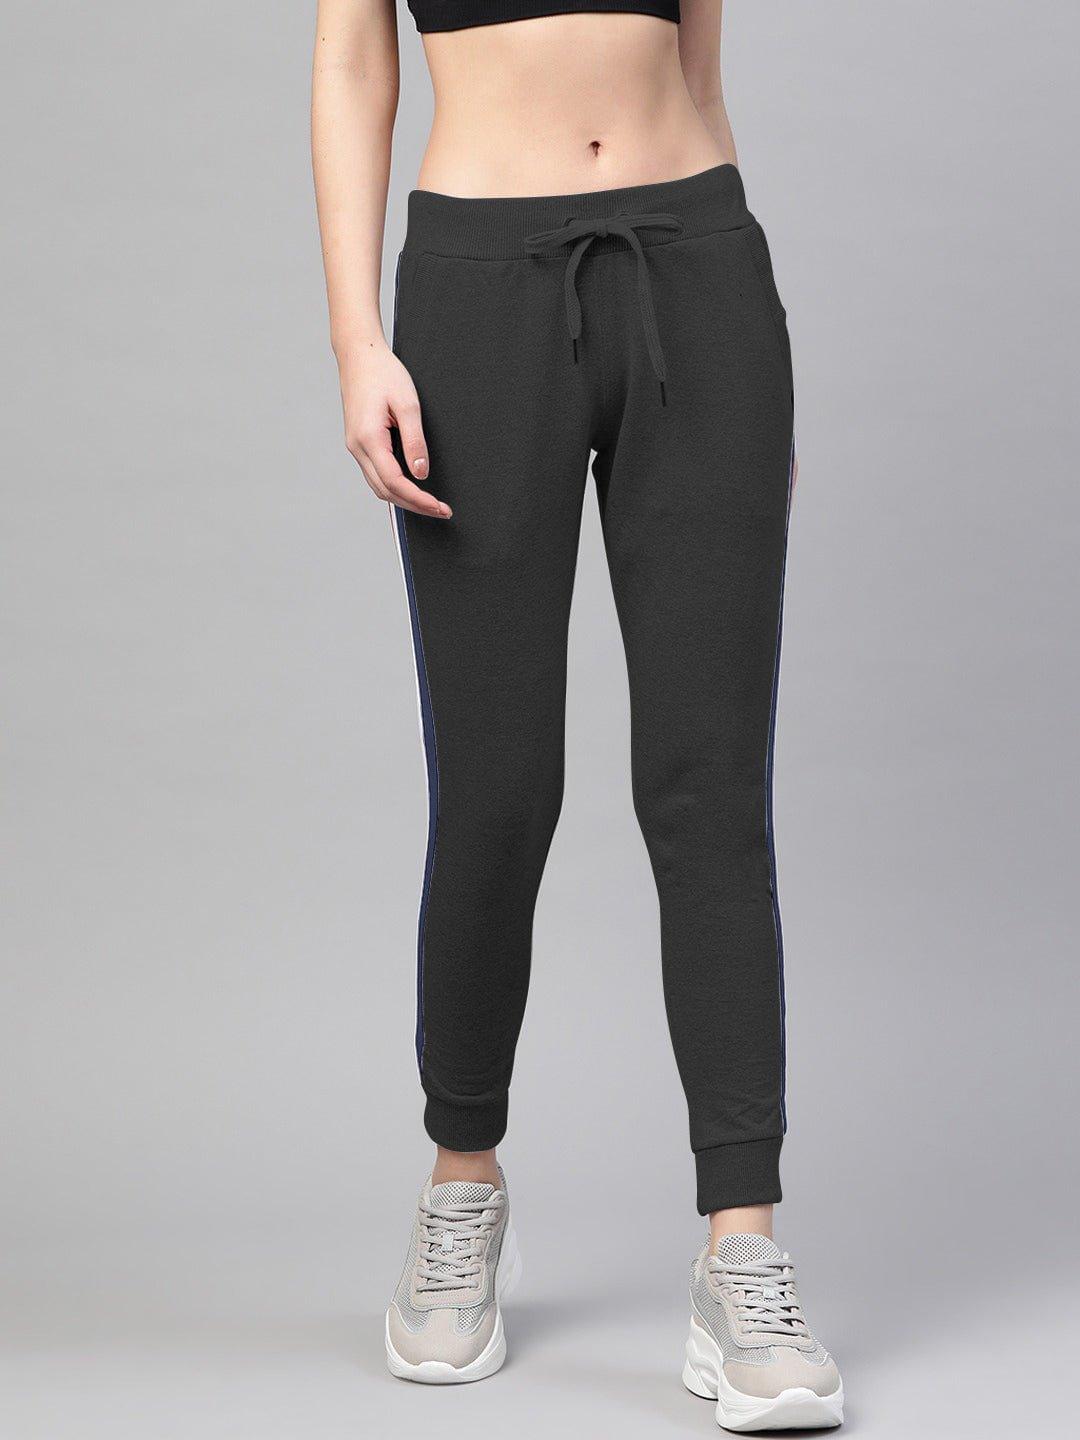 Joggers For Women in Black Colour Variant